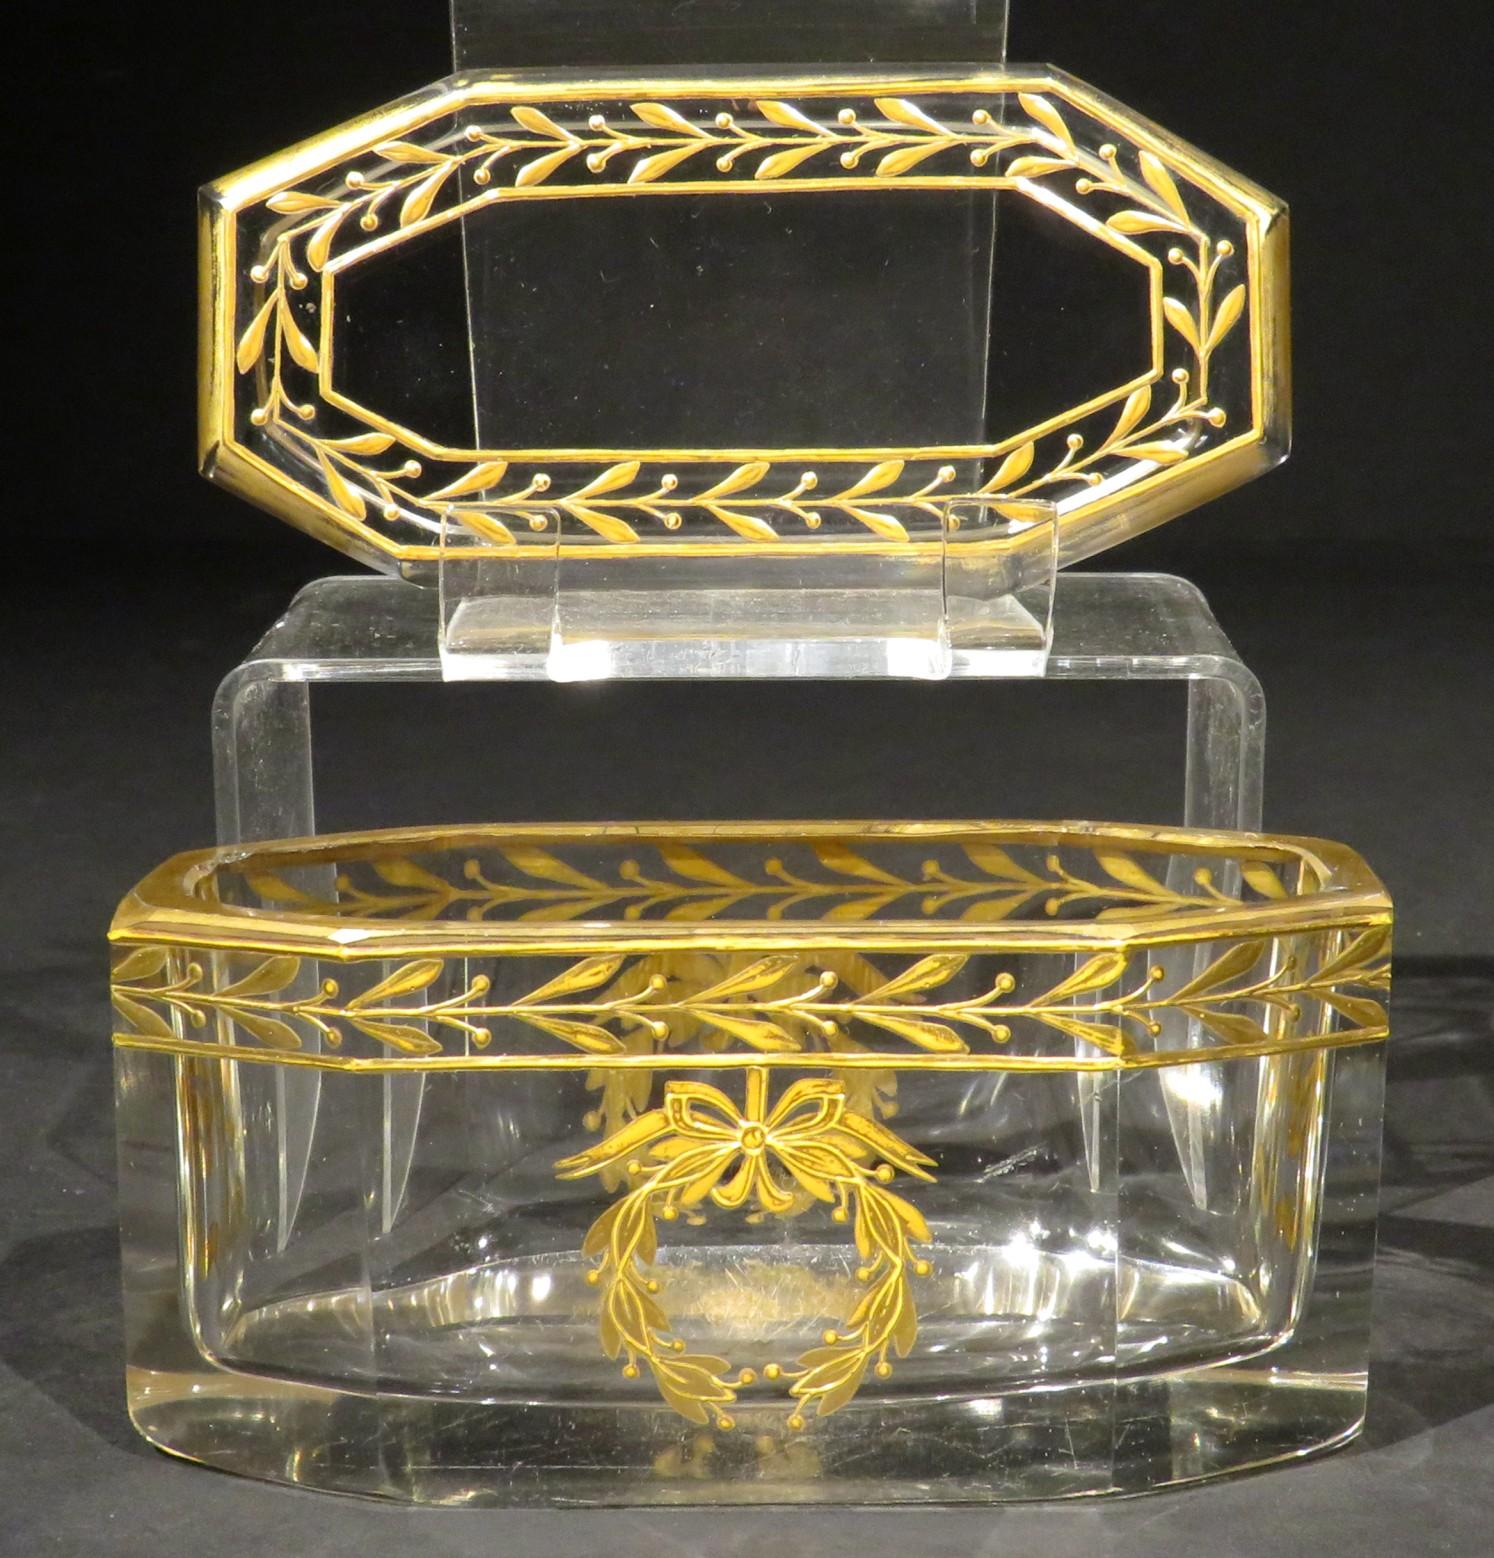 Hand-Painted Fine Early 20th Century Gilt Decorated Glass Dresser Jar or Box, Circa 1920 For Sale